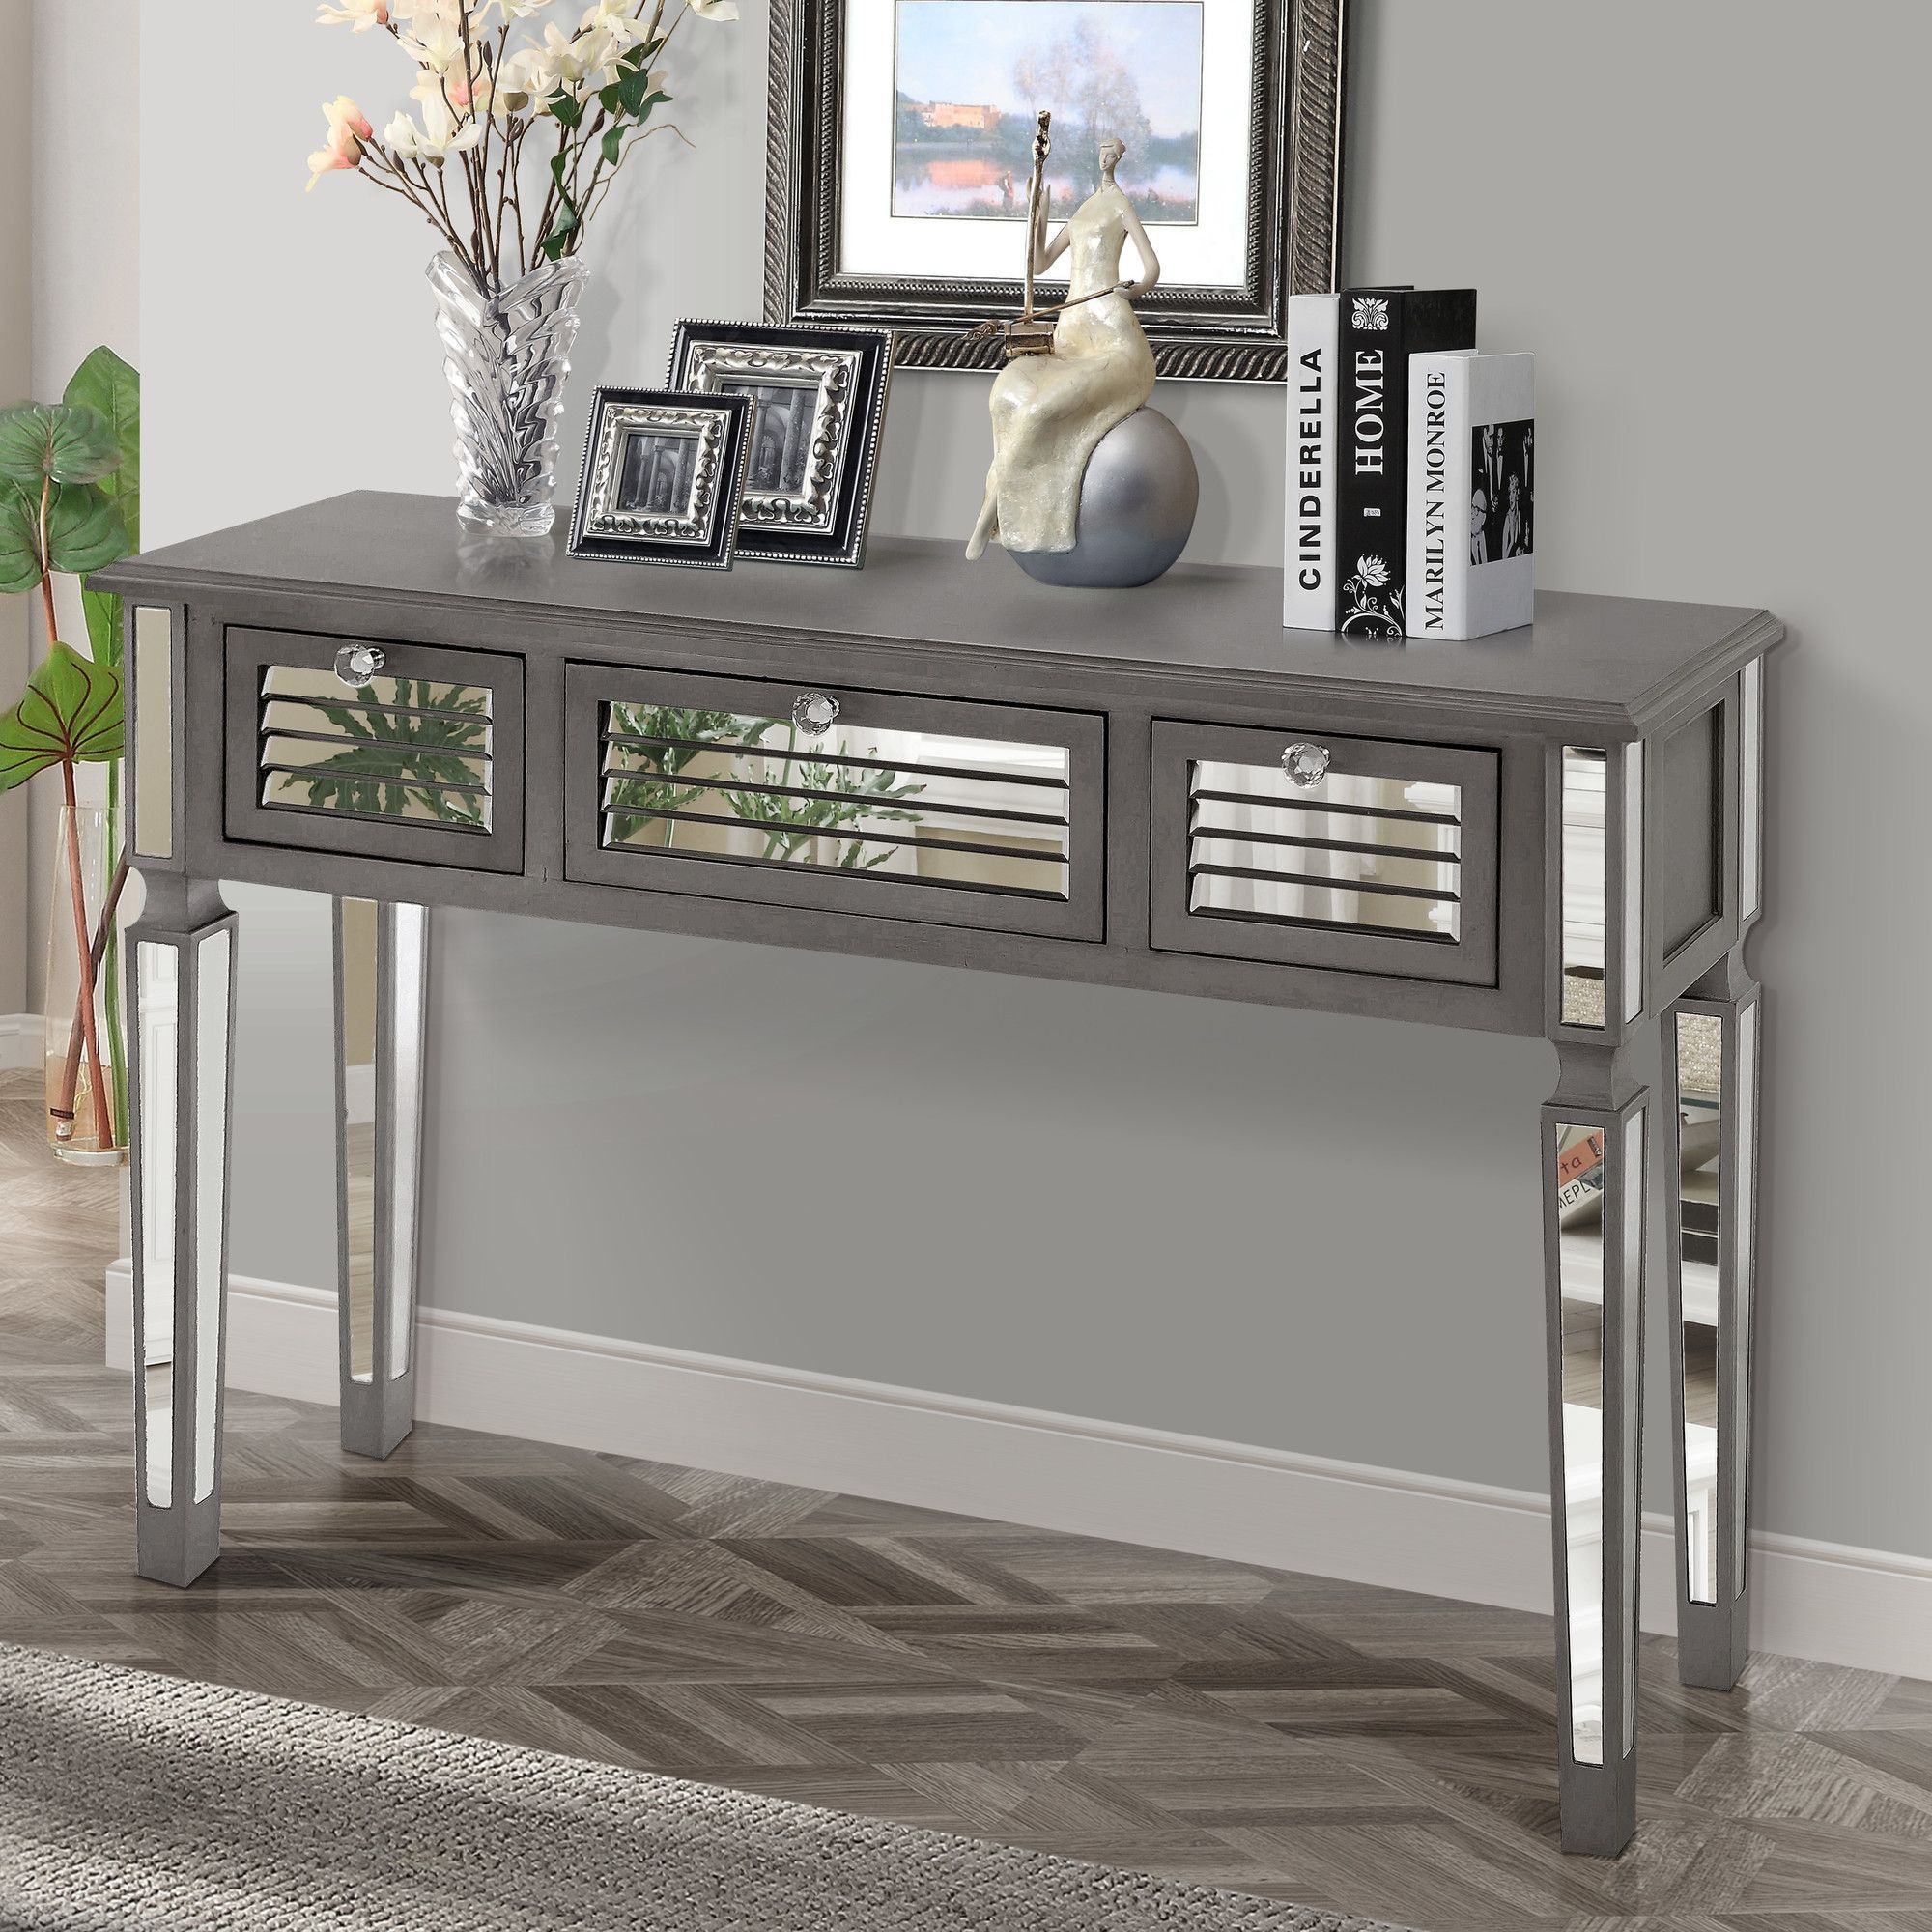 Summit Mirrored Console Table | Mirrored Console Table, Mirrored Inside Mirrored And Silver Console Tables (View 3 of 20)